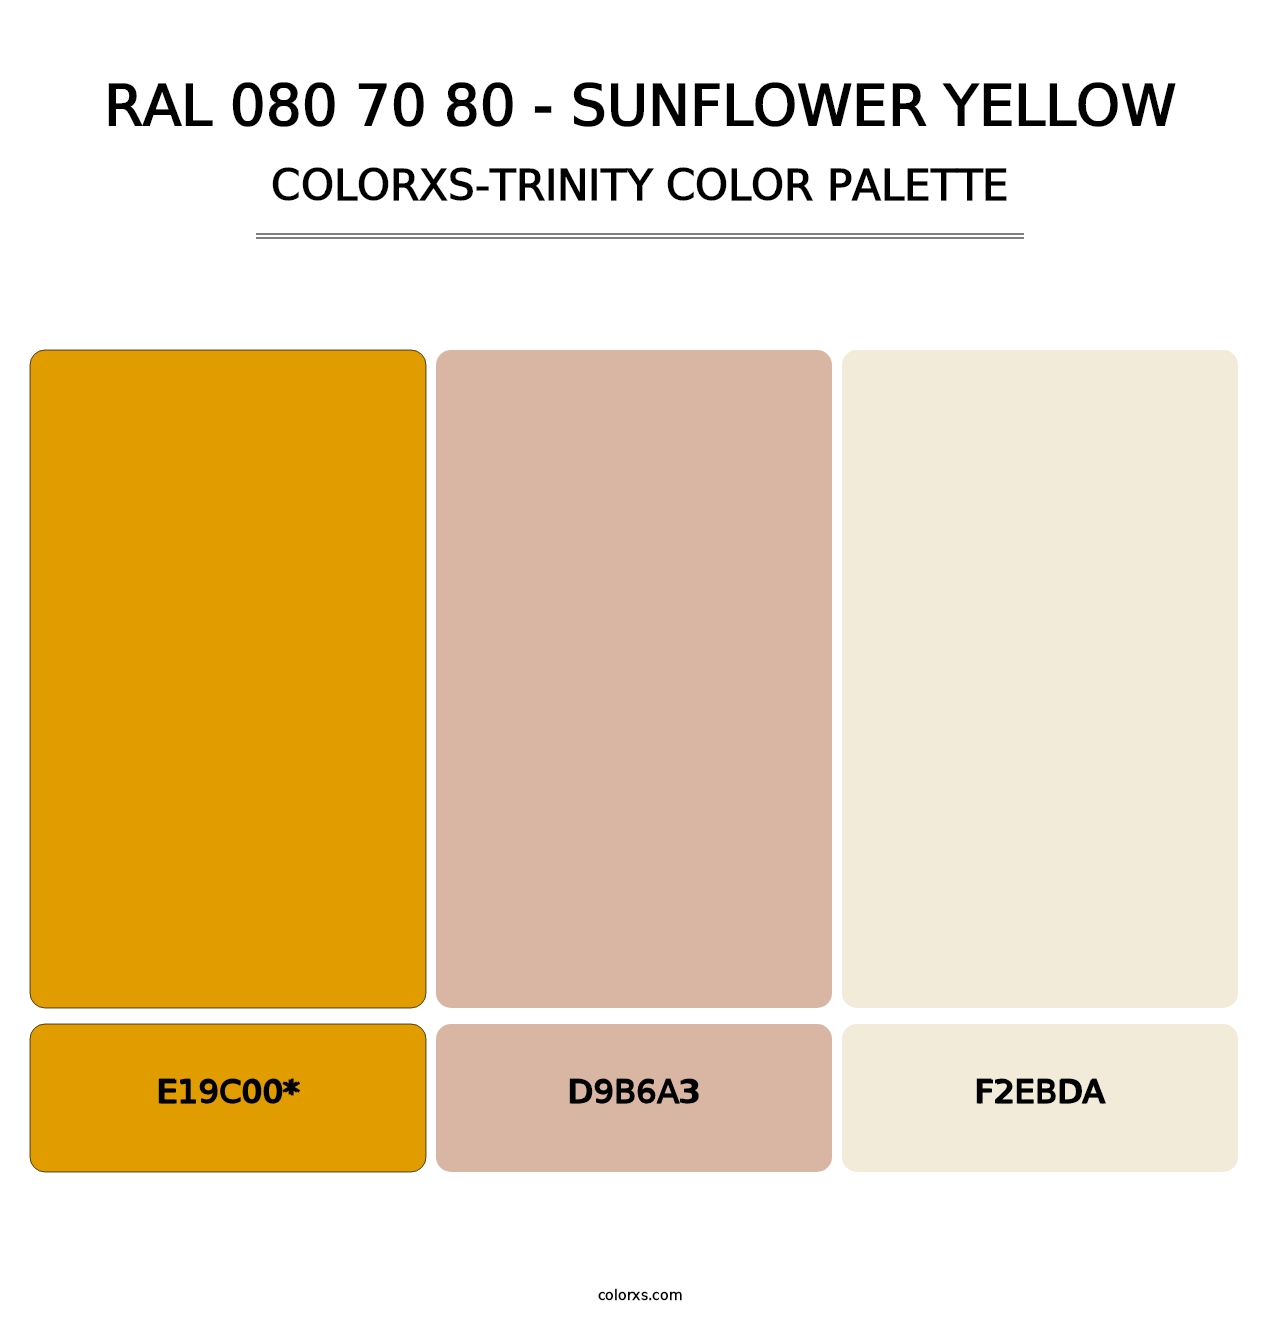 RAL 080 70 80 - Sunflower Yellow - Colorxs Trinity Palette